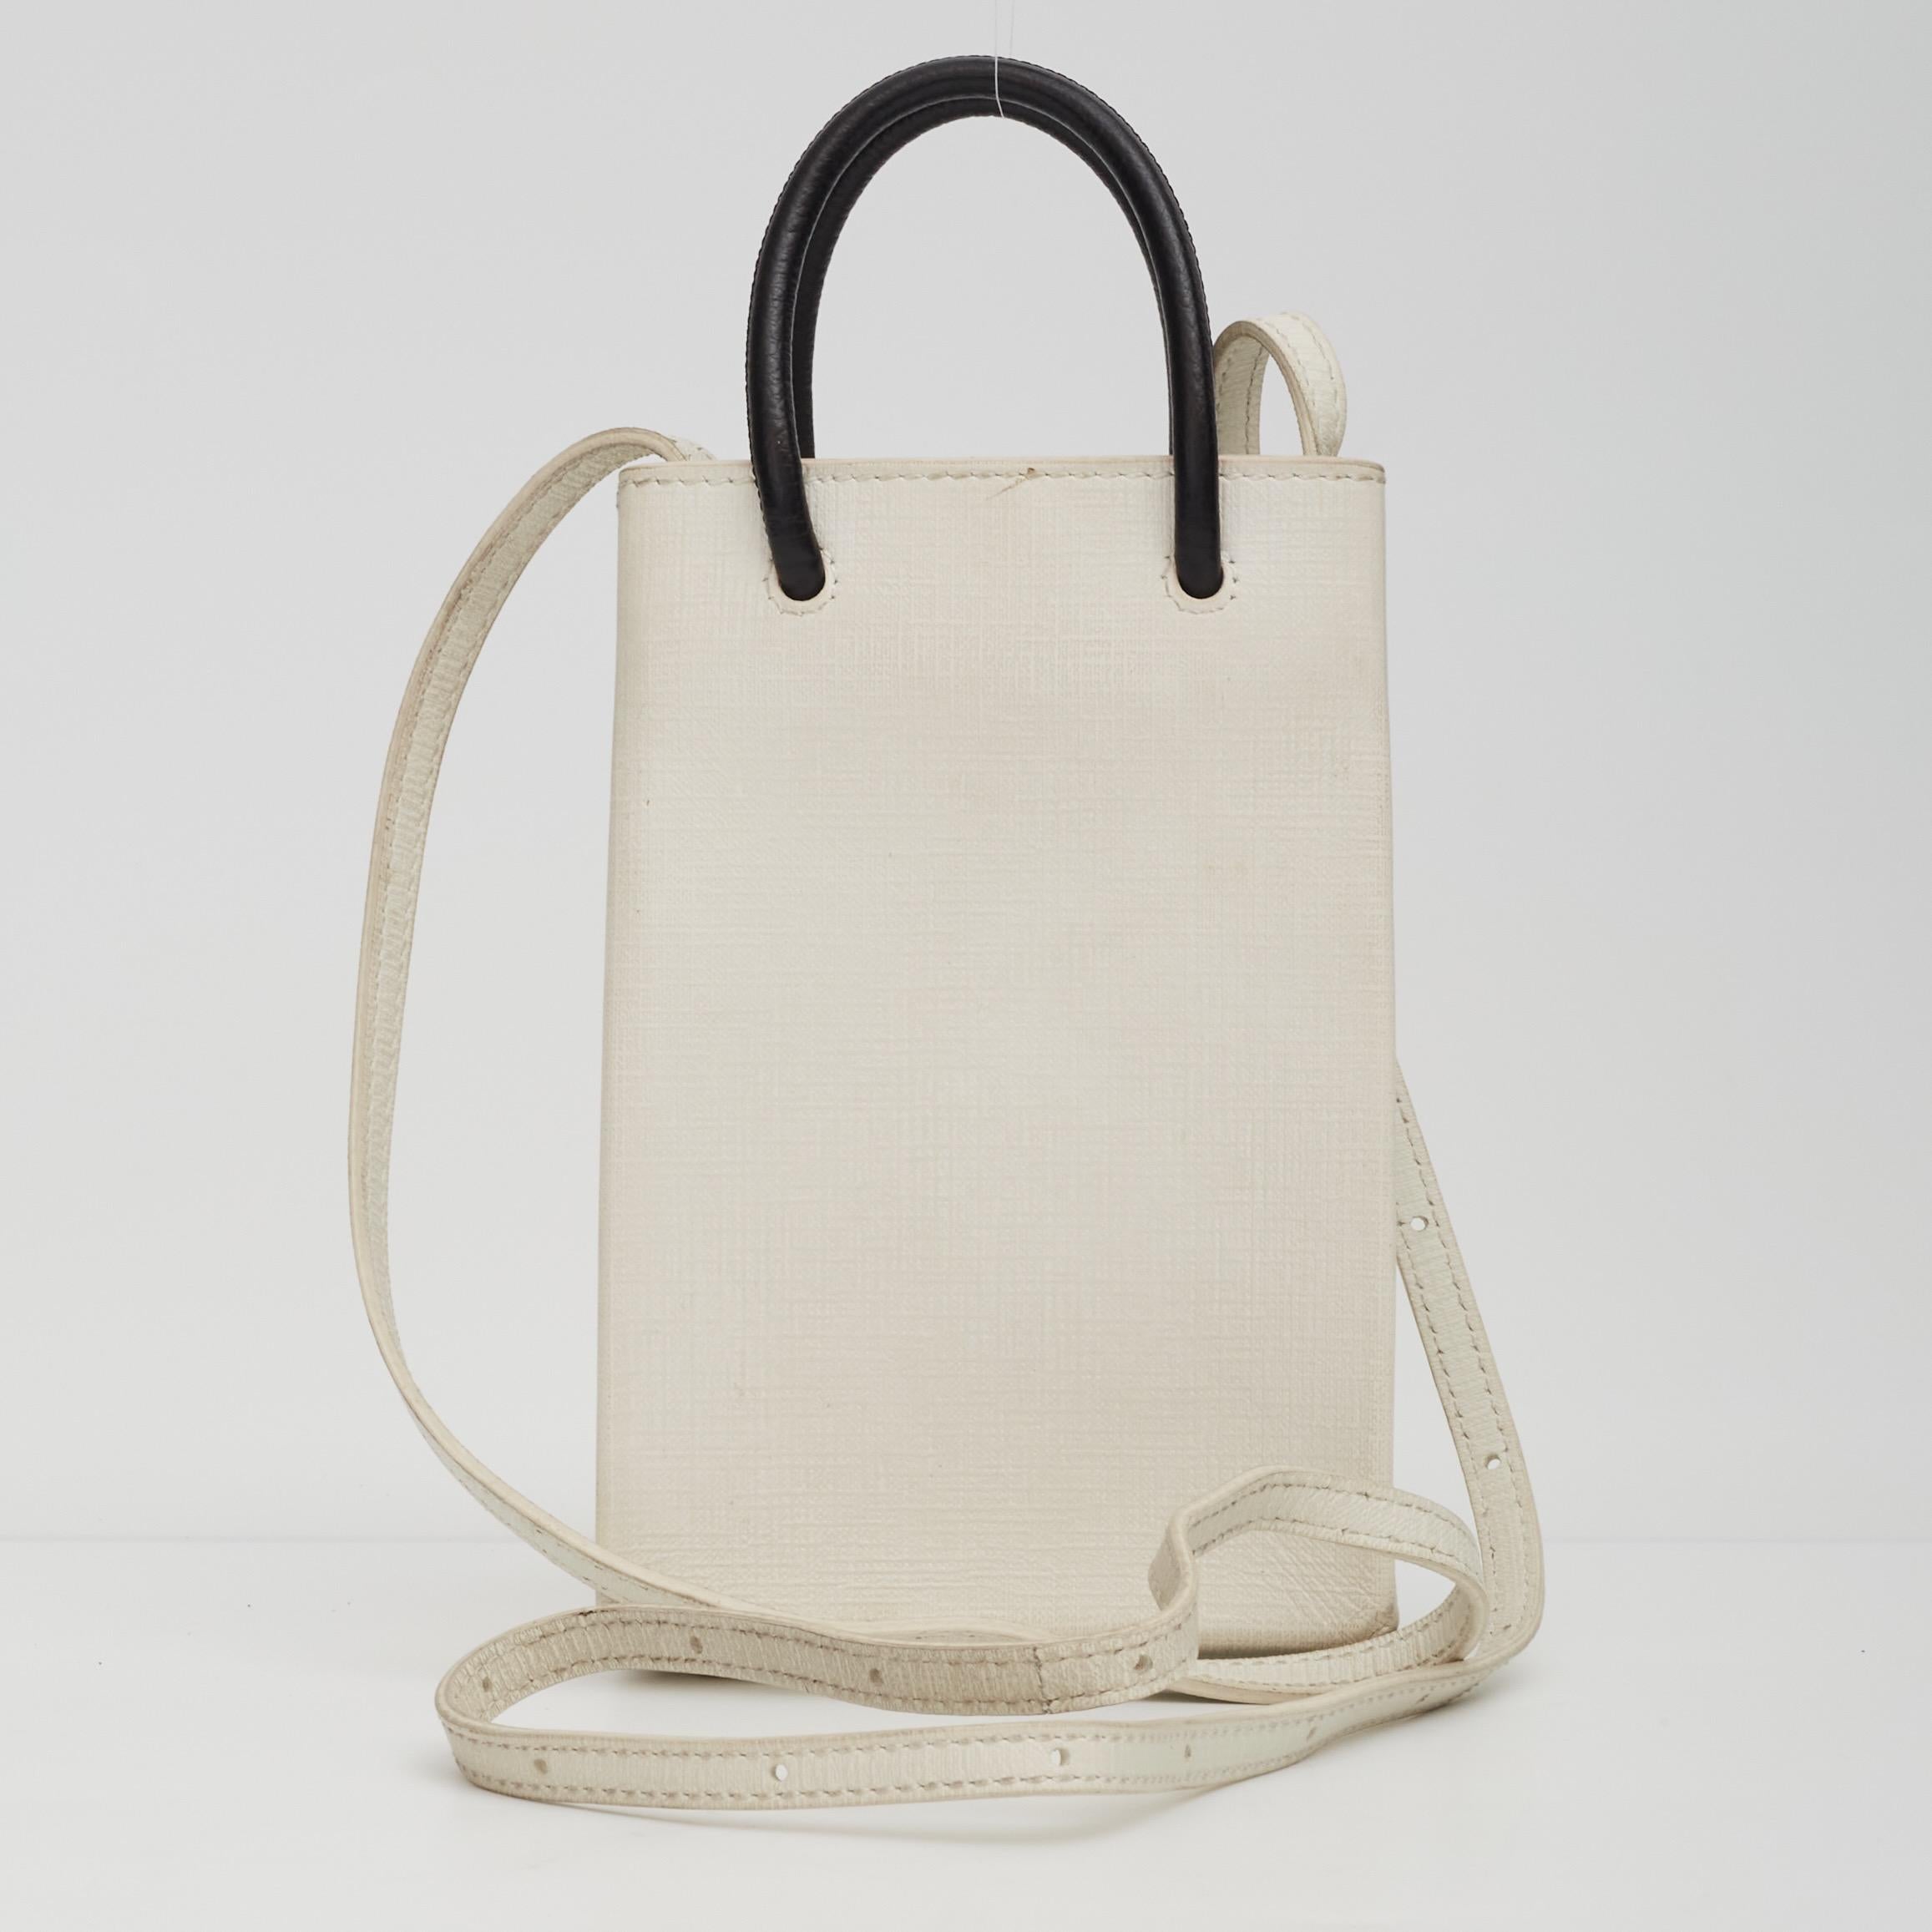 This bag is constructed of white calfskin leather. The bag features dual thin black rolled leather top handles, an adjustable leather crossbody strap, an open top with snap closure and a black fabric interior with a patch pocket.

Color: